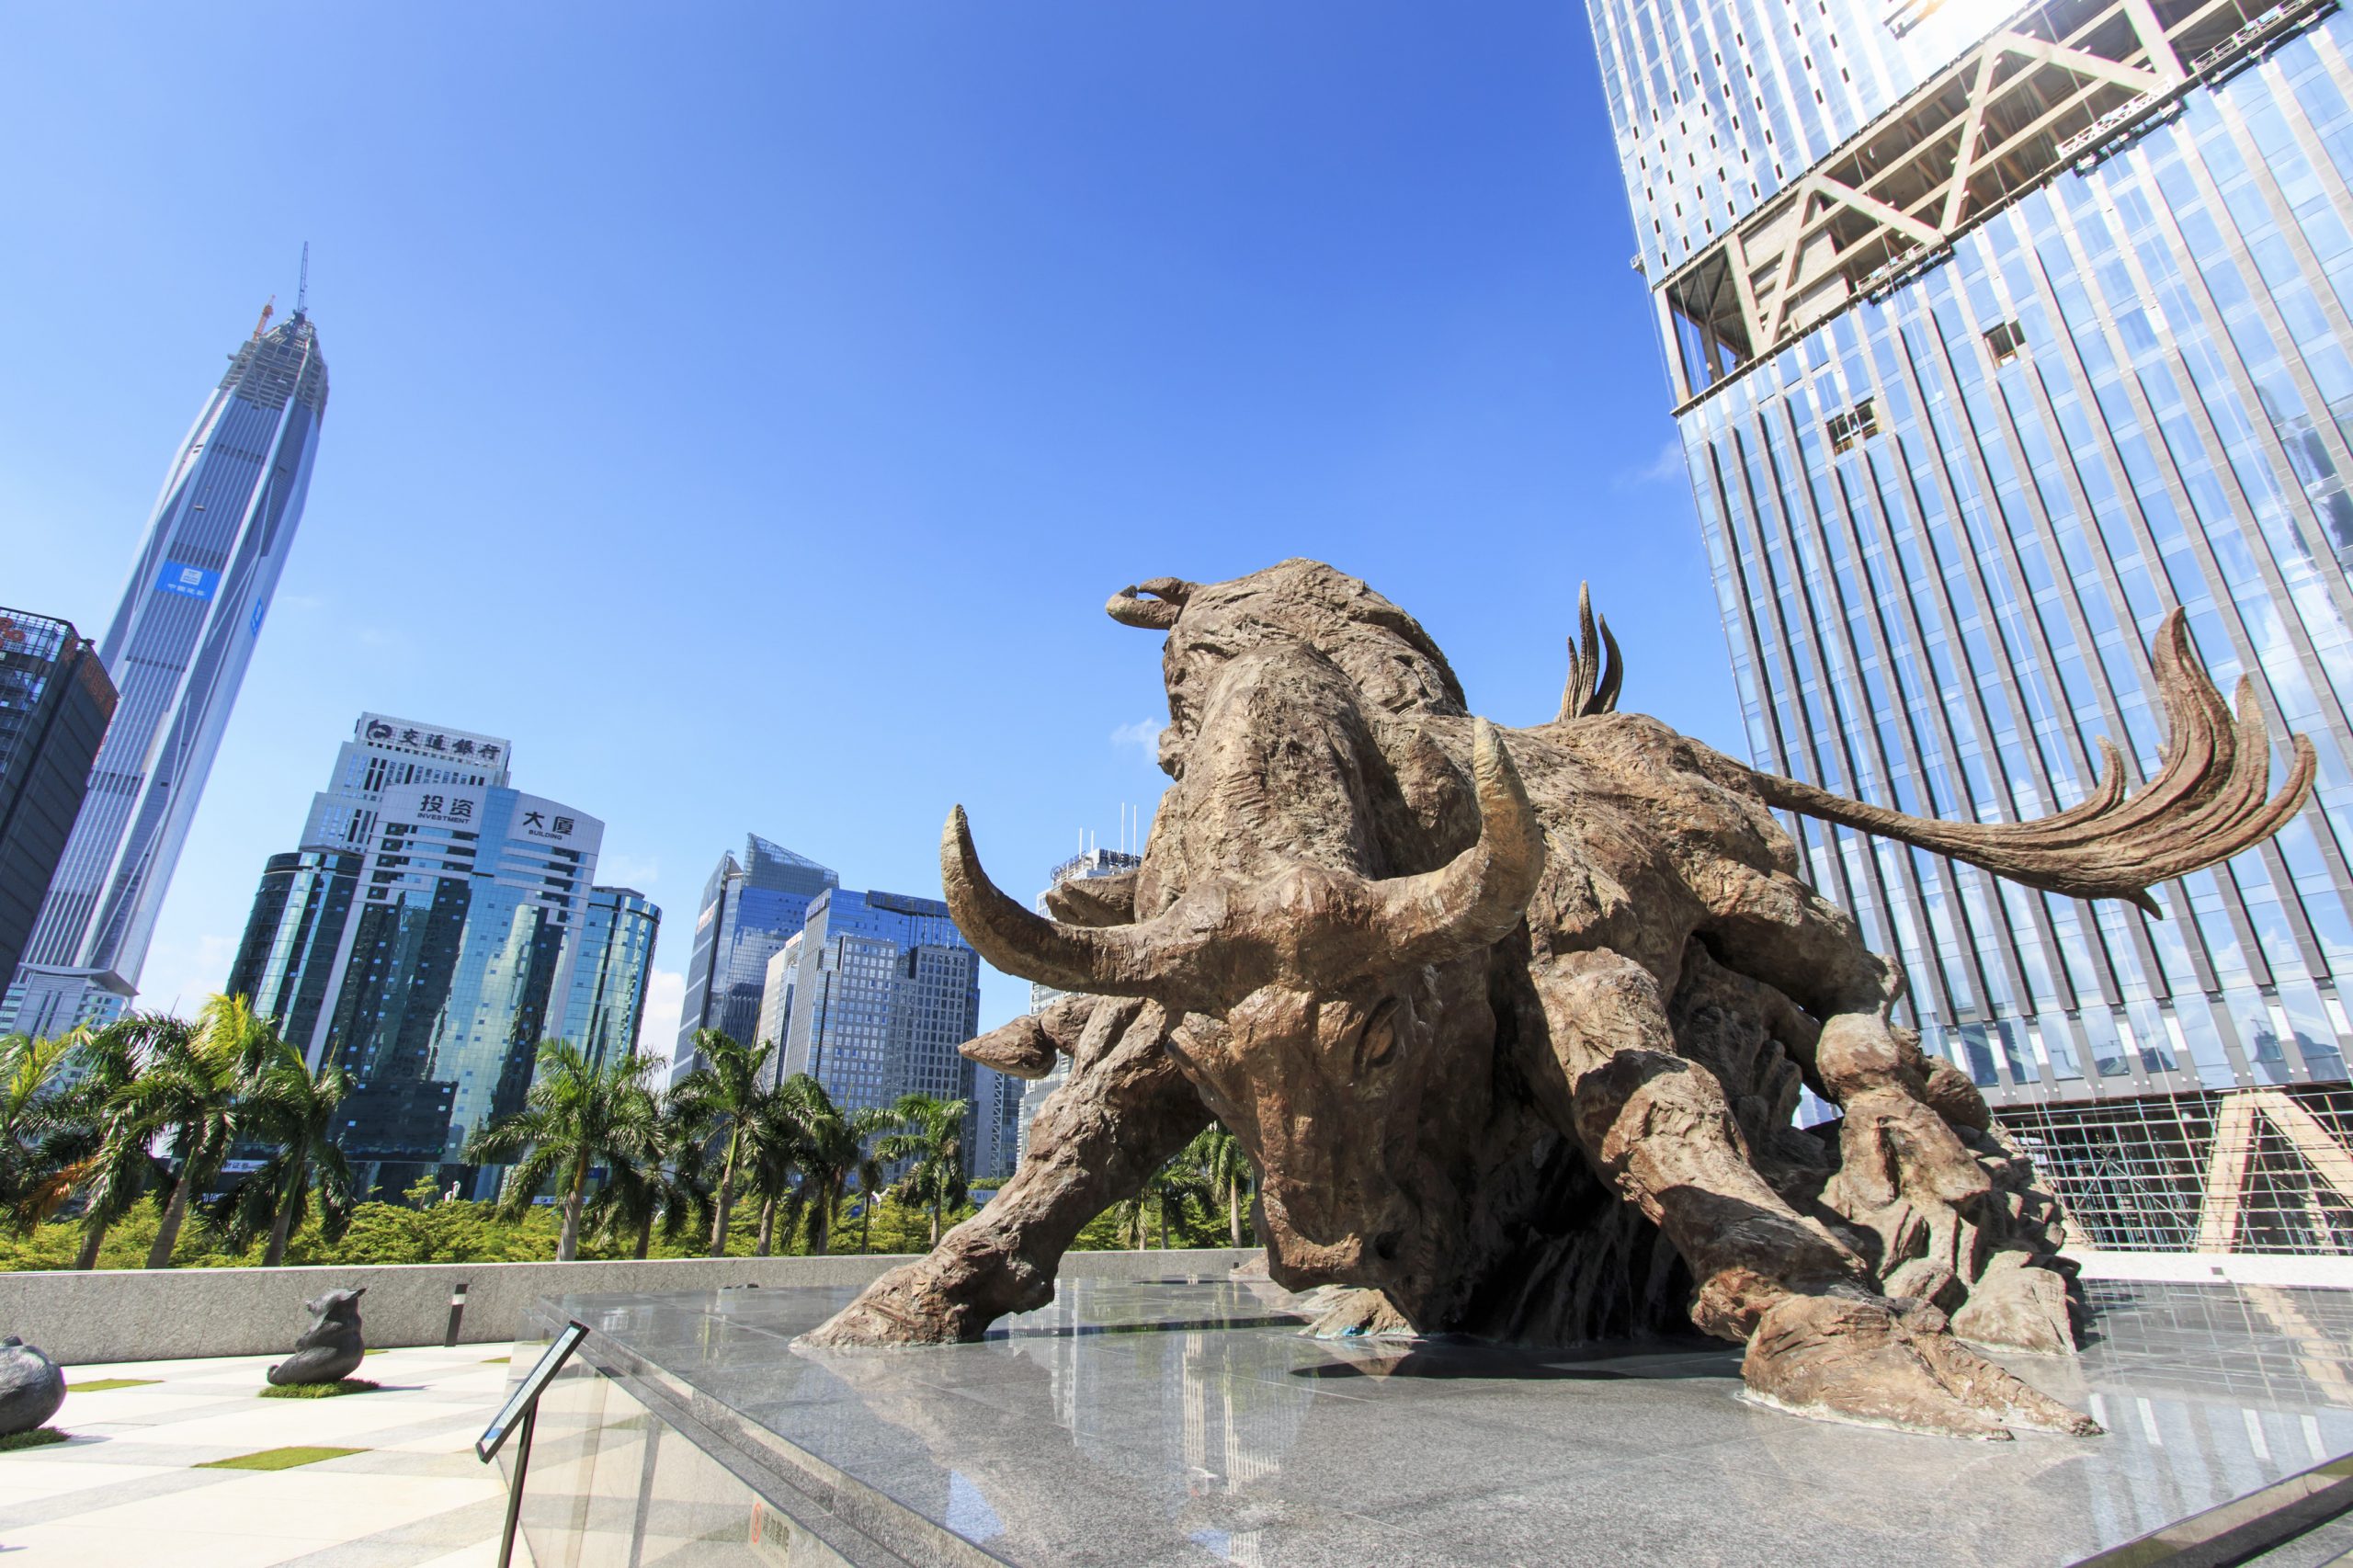 Shenzhen ChiNext debuts 18 startups under new IPO rules, stocks soar